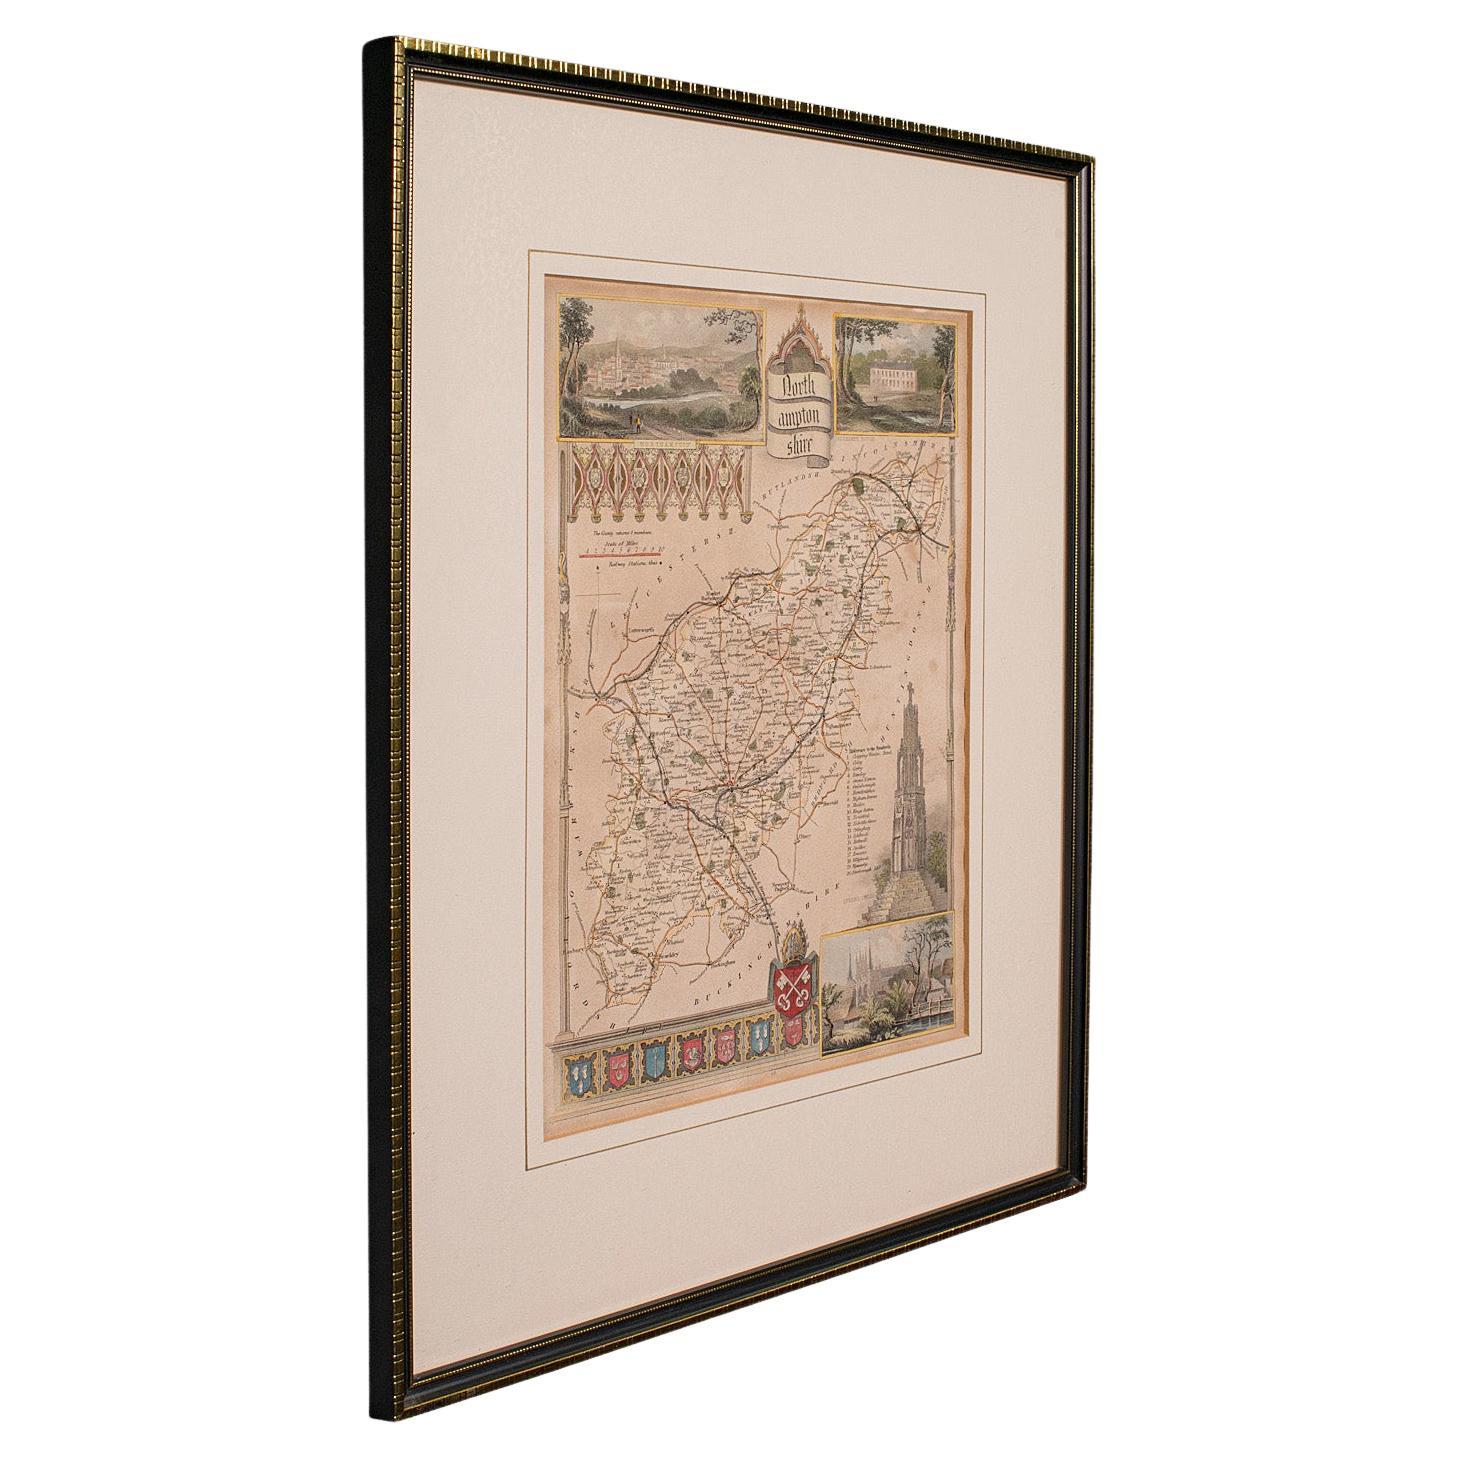 Antique Lithography Map, Hertfordshire, English, Framed Engraving, Cartography For Sale